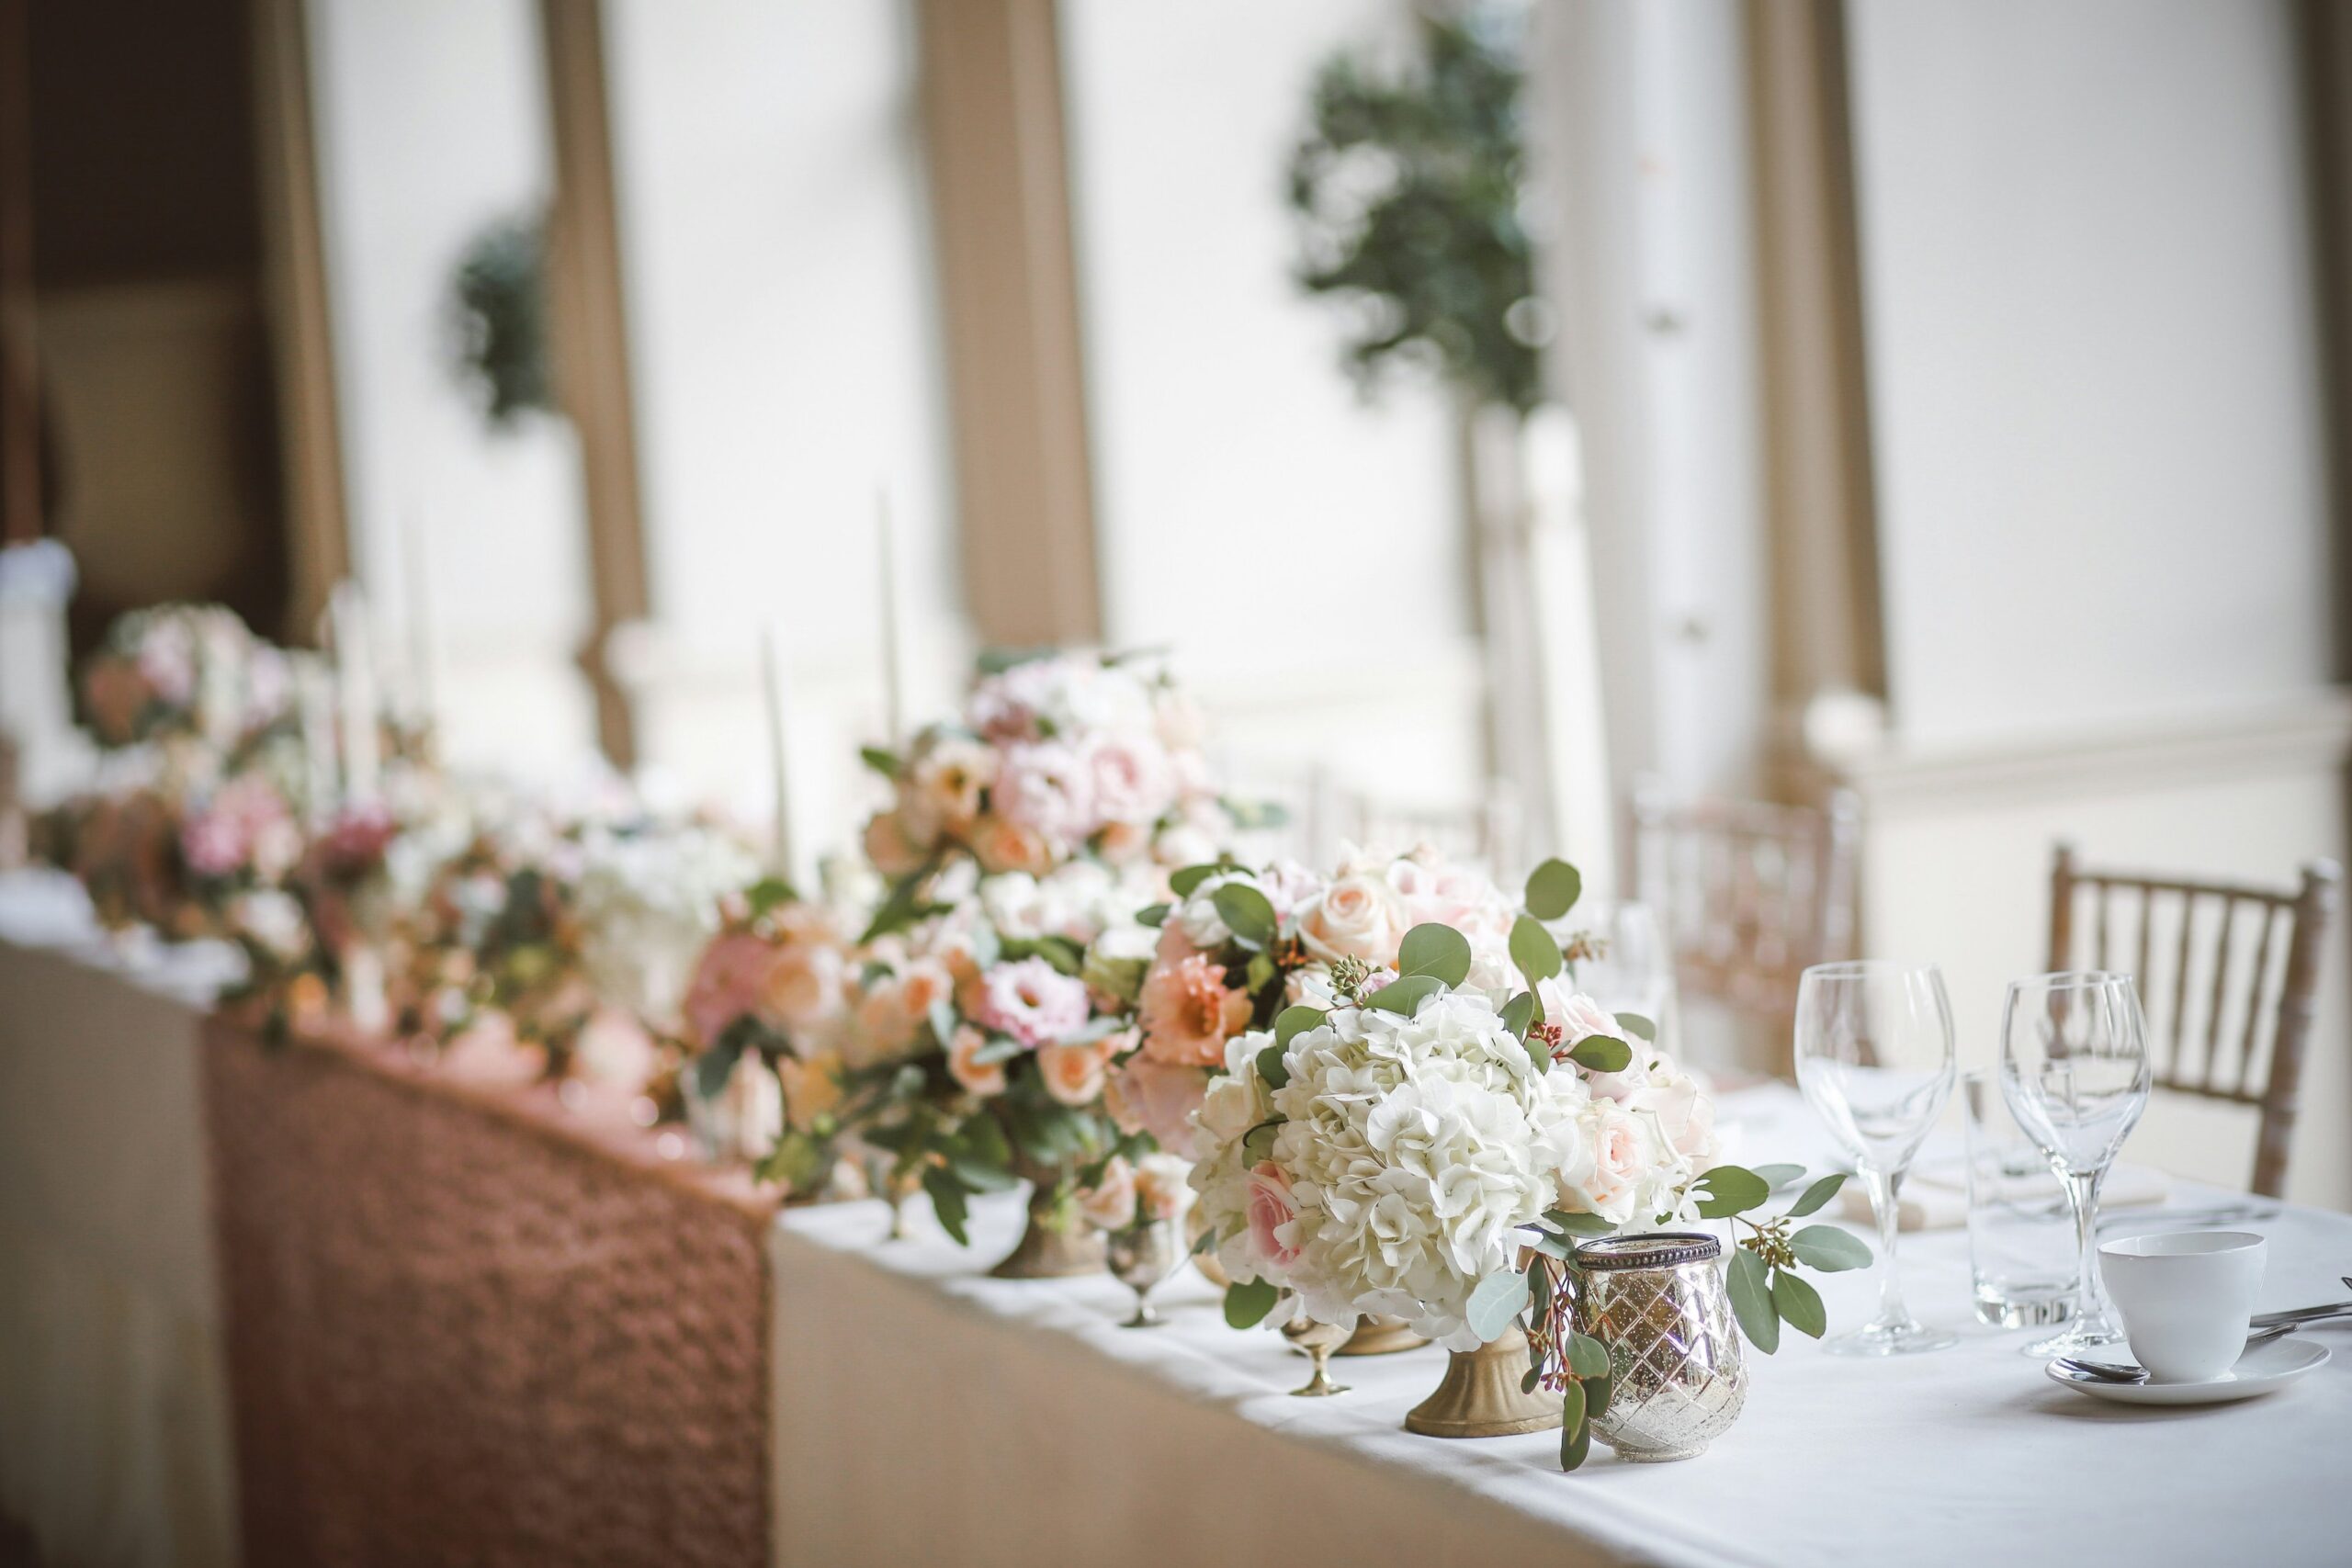 Randy peters - Catering for wedding table placements